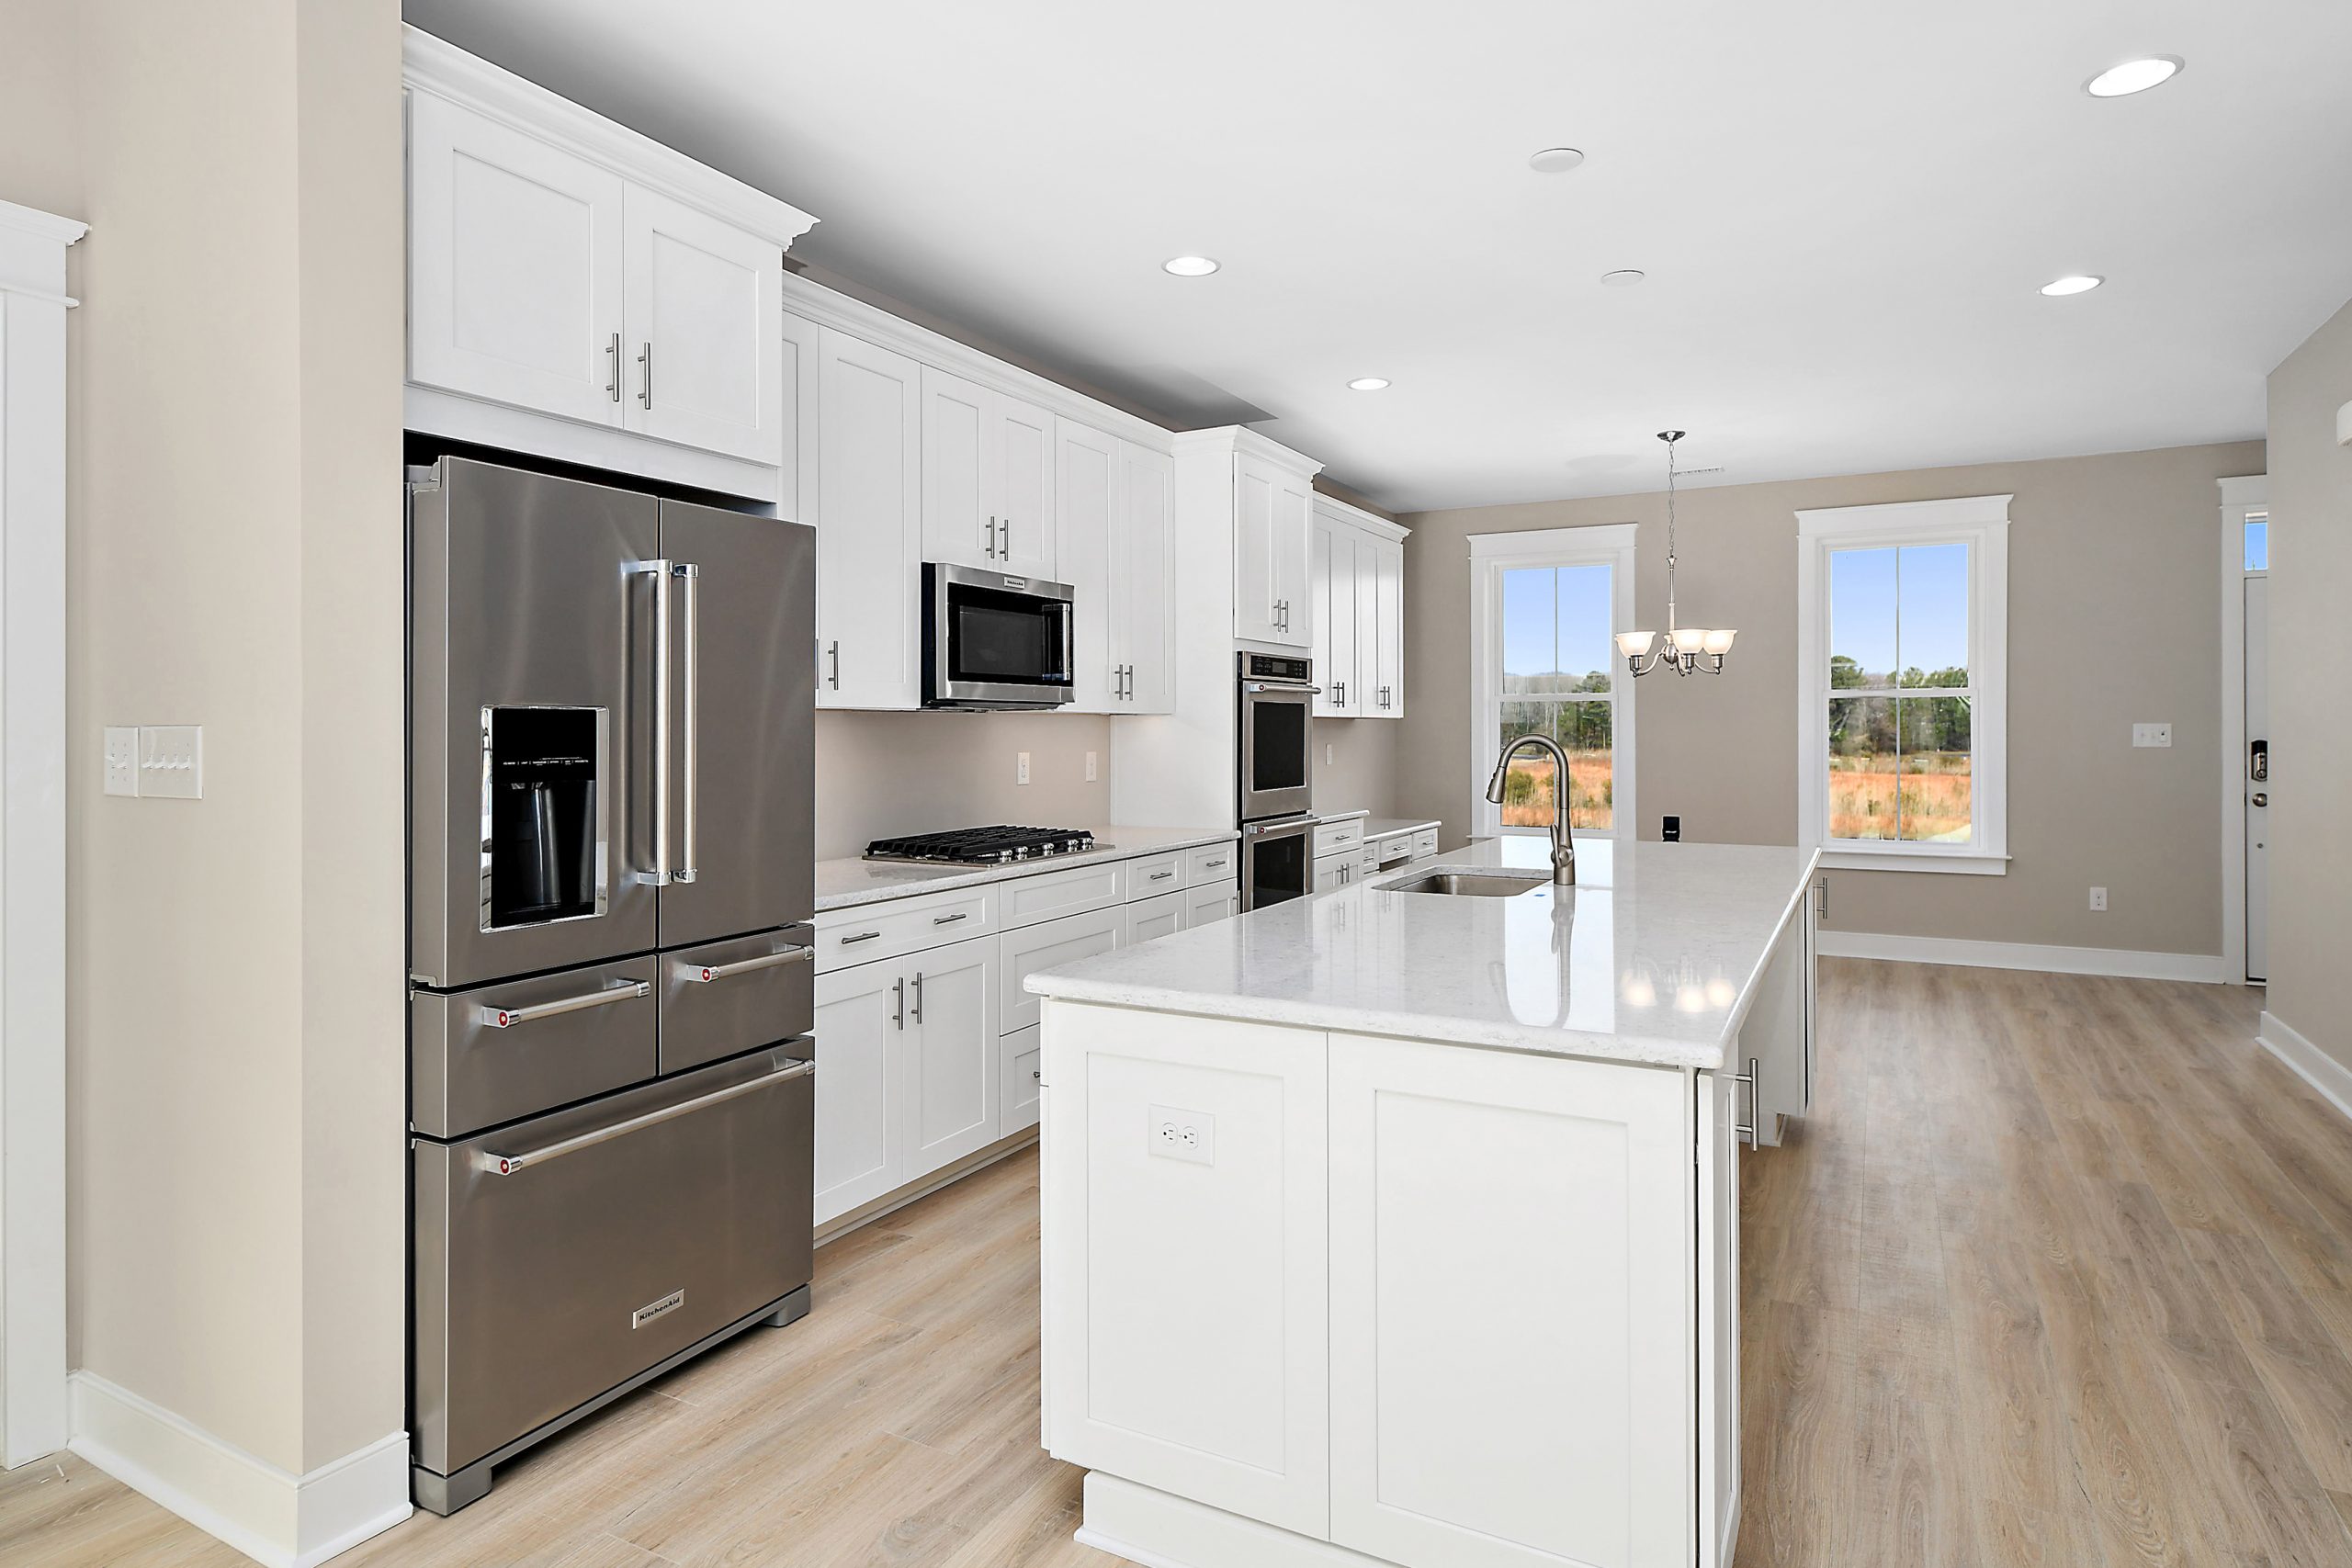 Open concept kitchen at Tidal Walk community on the Eastern Shore